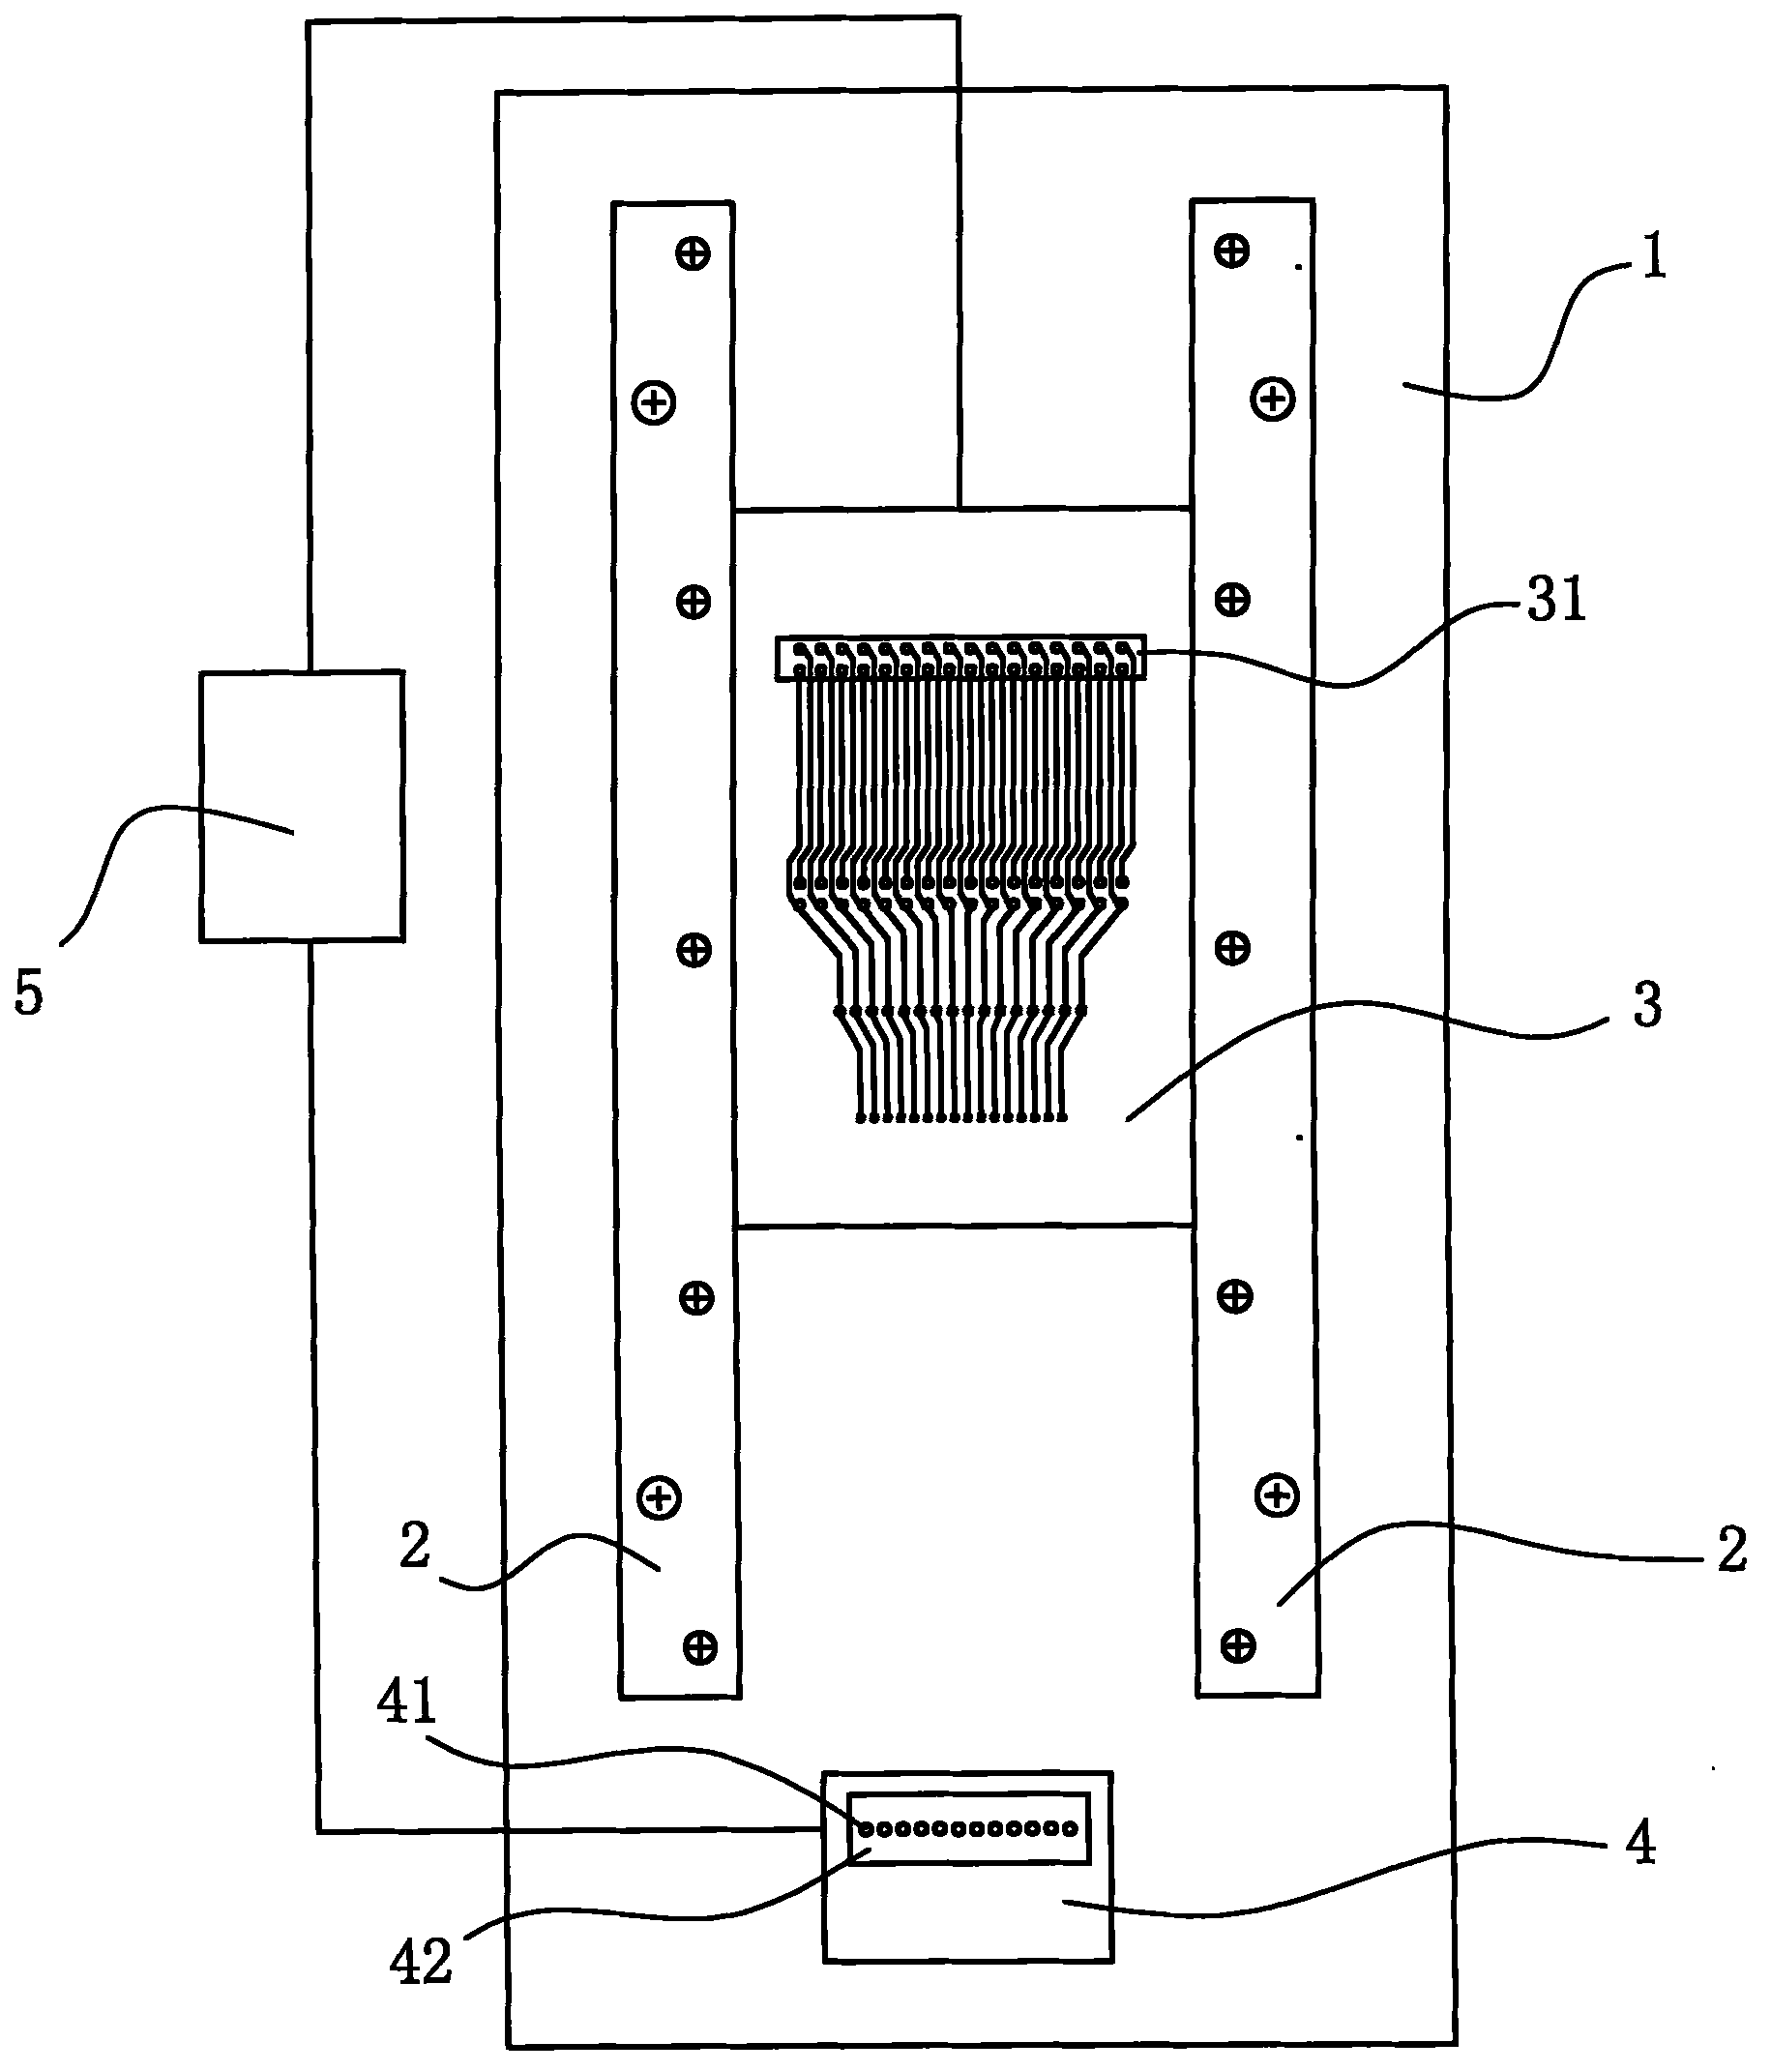 Method for electrical detection on wire harnesses of different sizes and universal test fixture